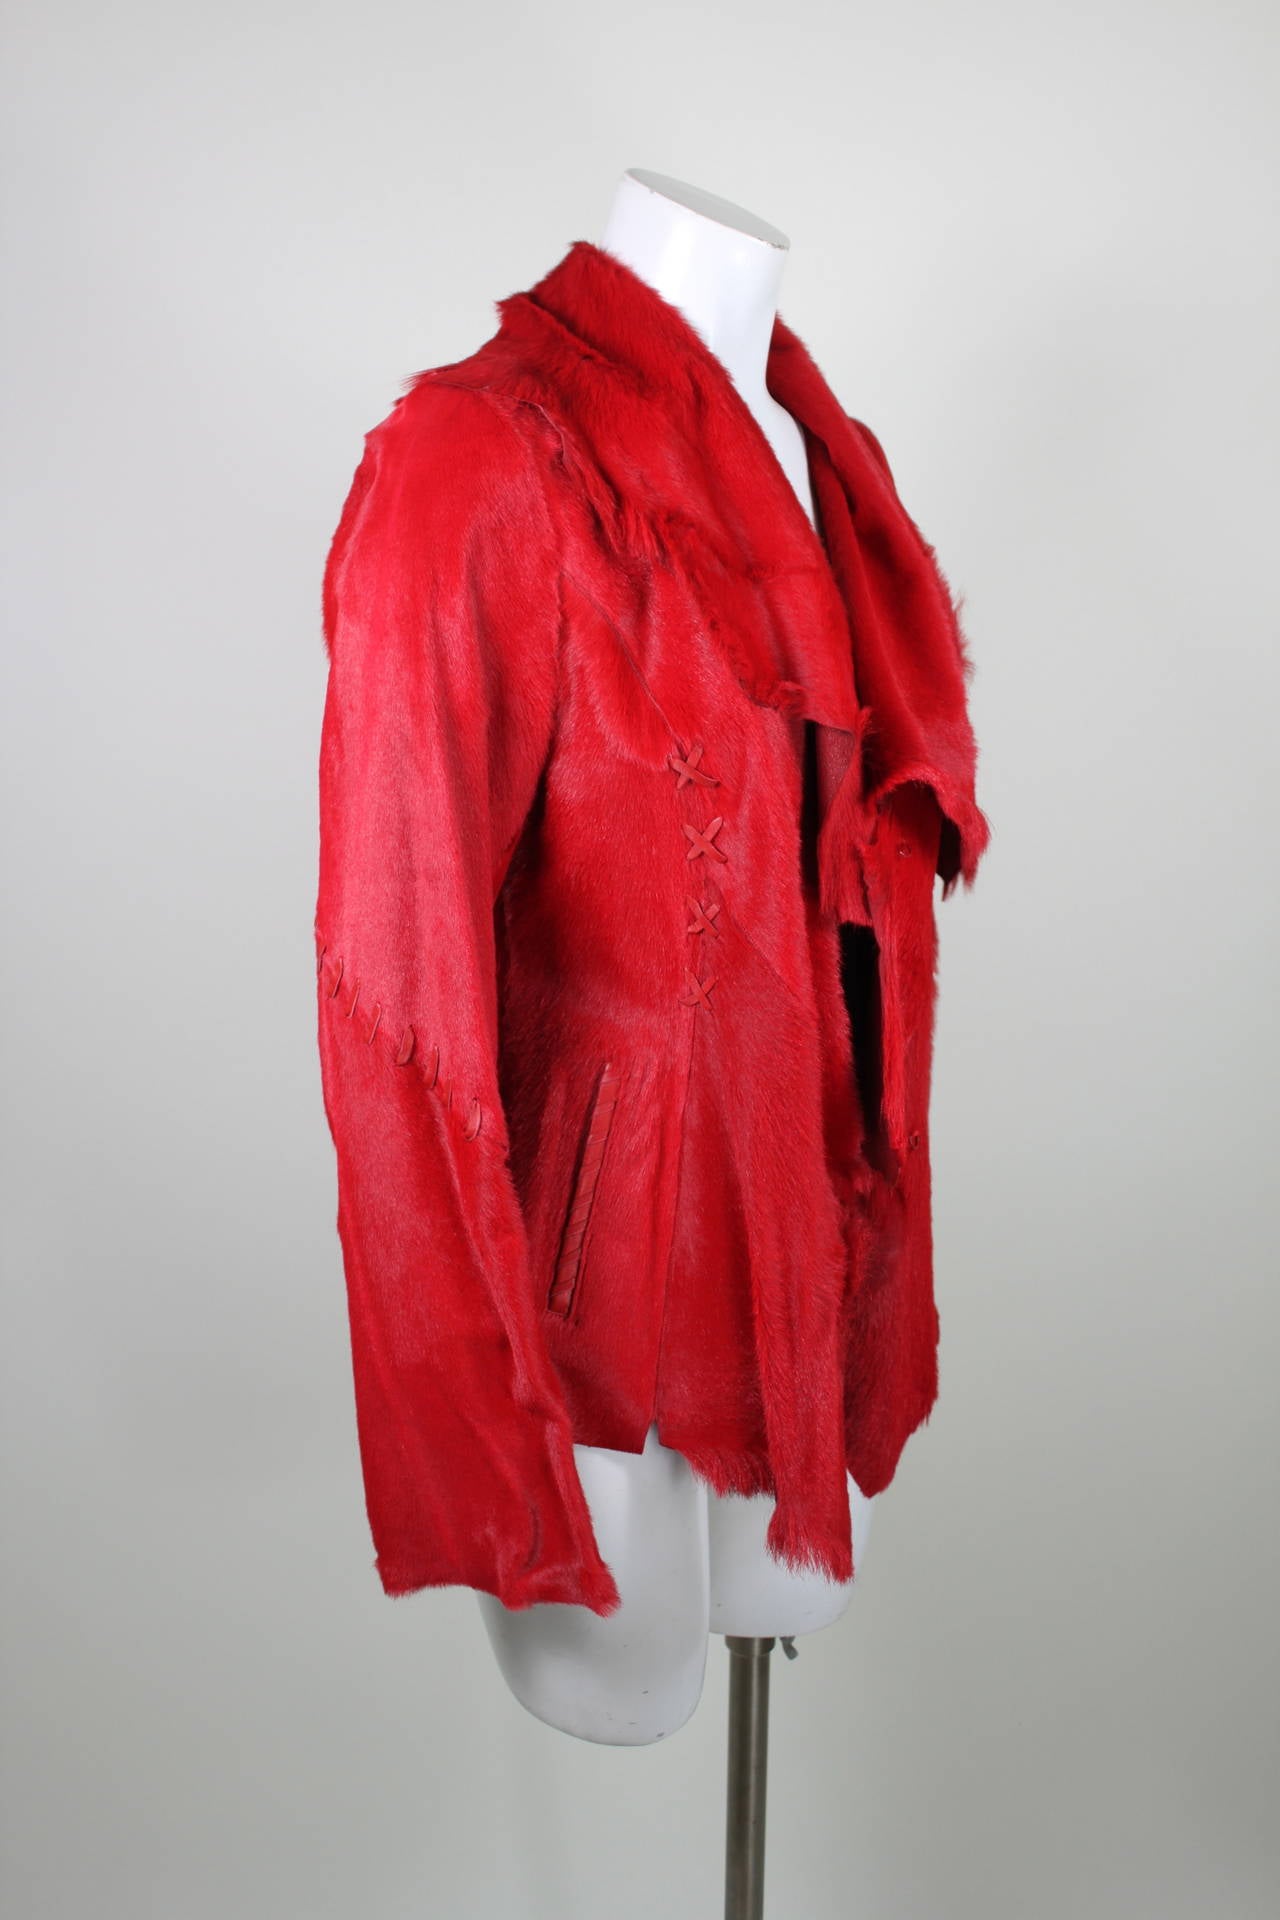 A gorgeous lipstick red asymmetrical lamb fur jacket from Via Veneto.

Measurements--
Bust: up to 36 inches
Waist: up to 31 inches
Length, Shoulder to Shoulder: 15.5 inches
Sleeve Length: 25 inches
Length, Center Back to Hem: 24 inches